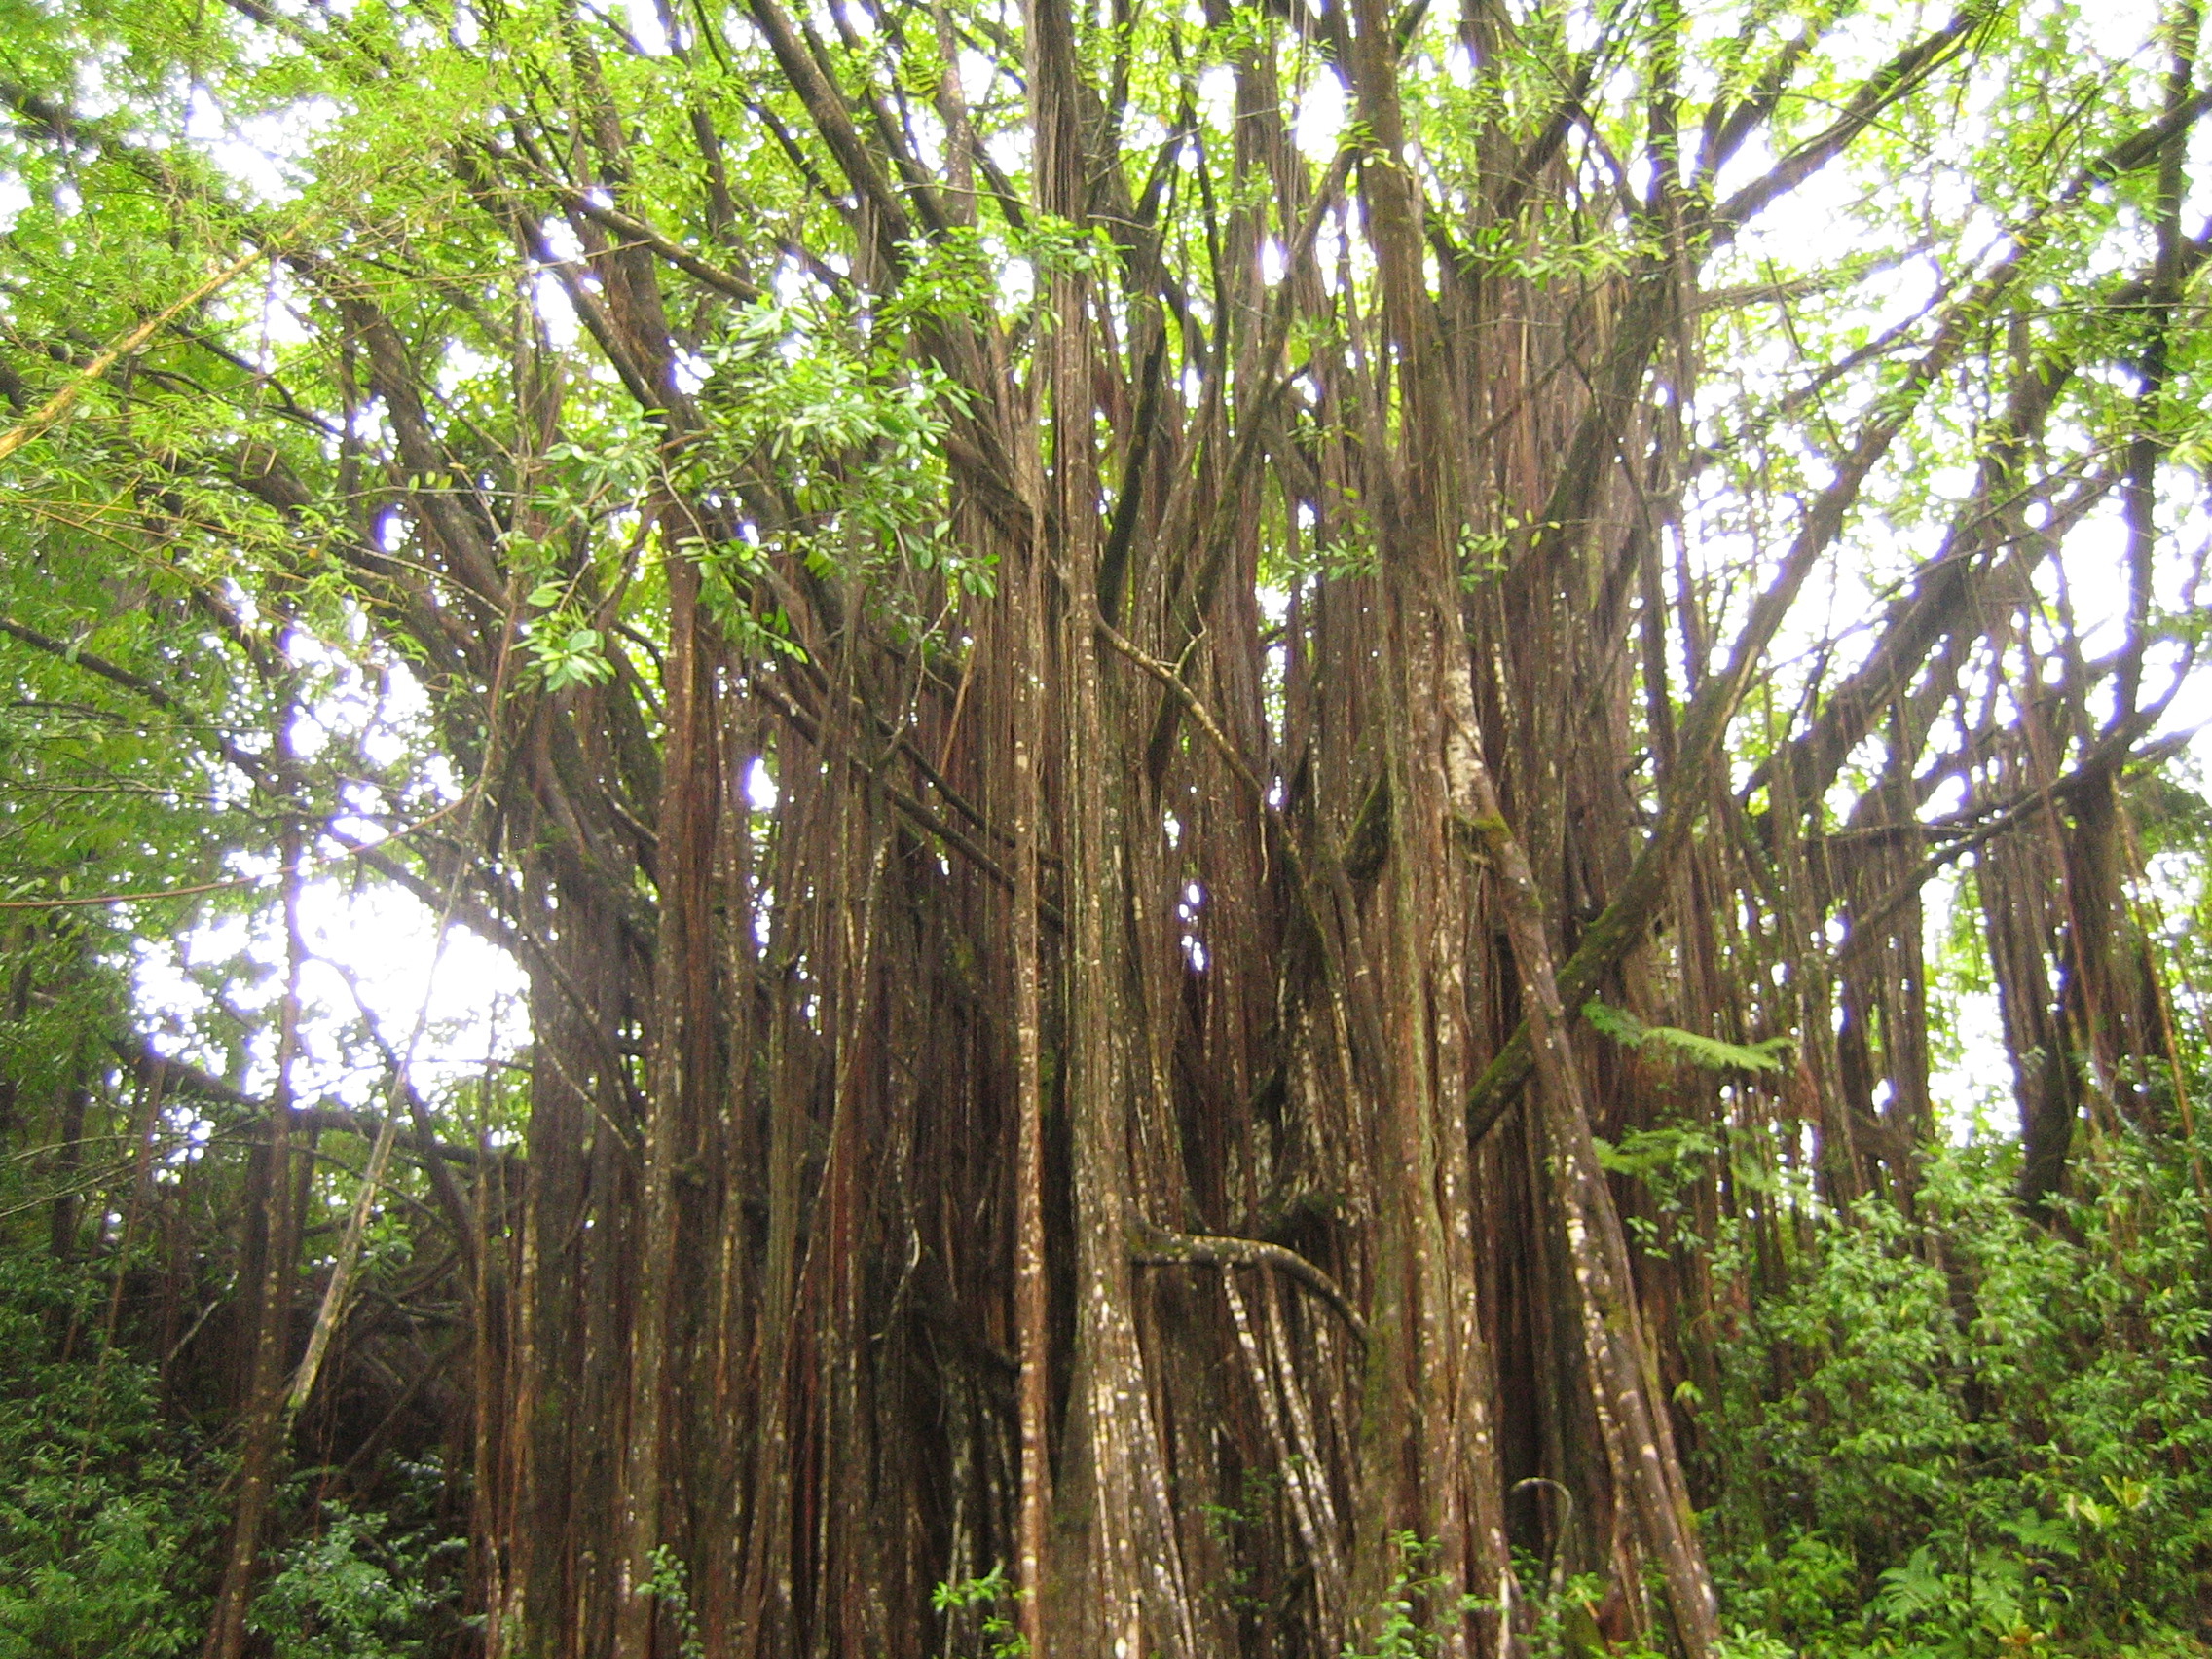 Banyon Tree (actually it's spelled Banyan but I've been getting lots of hits with Banyon)